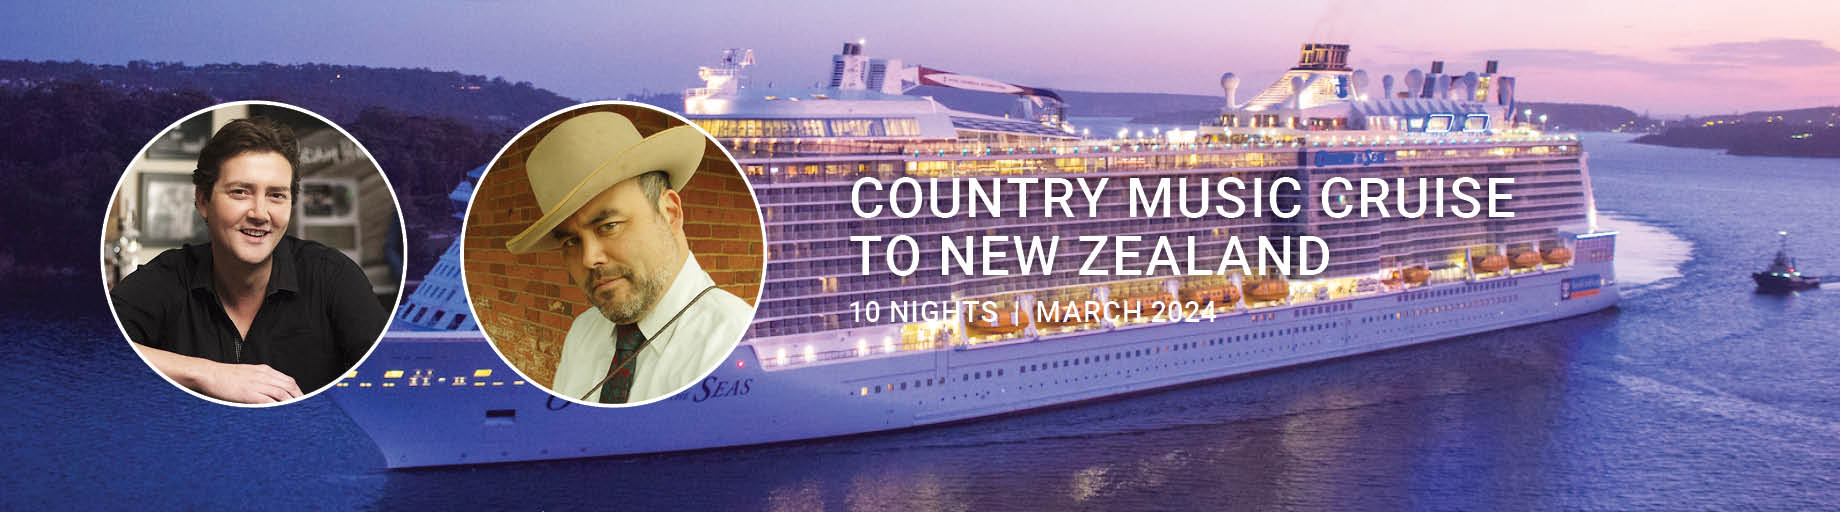 Country Music Cruise to New Zealand